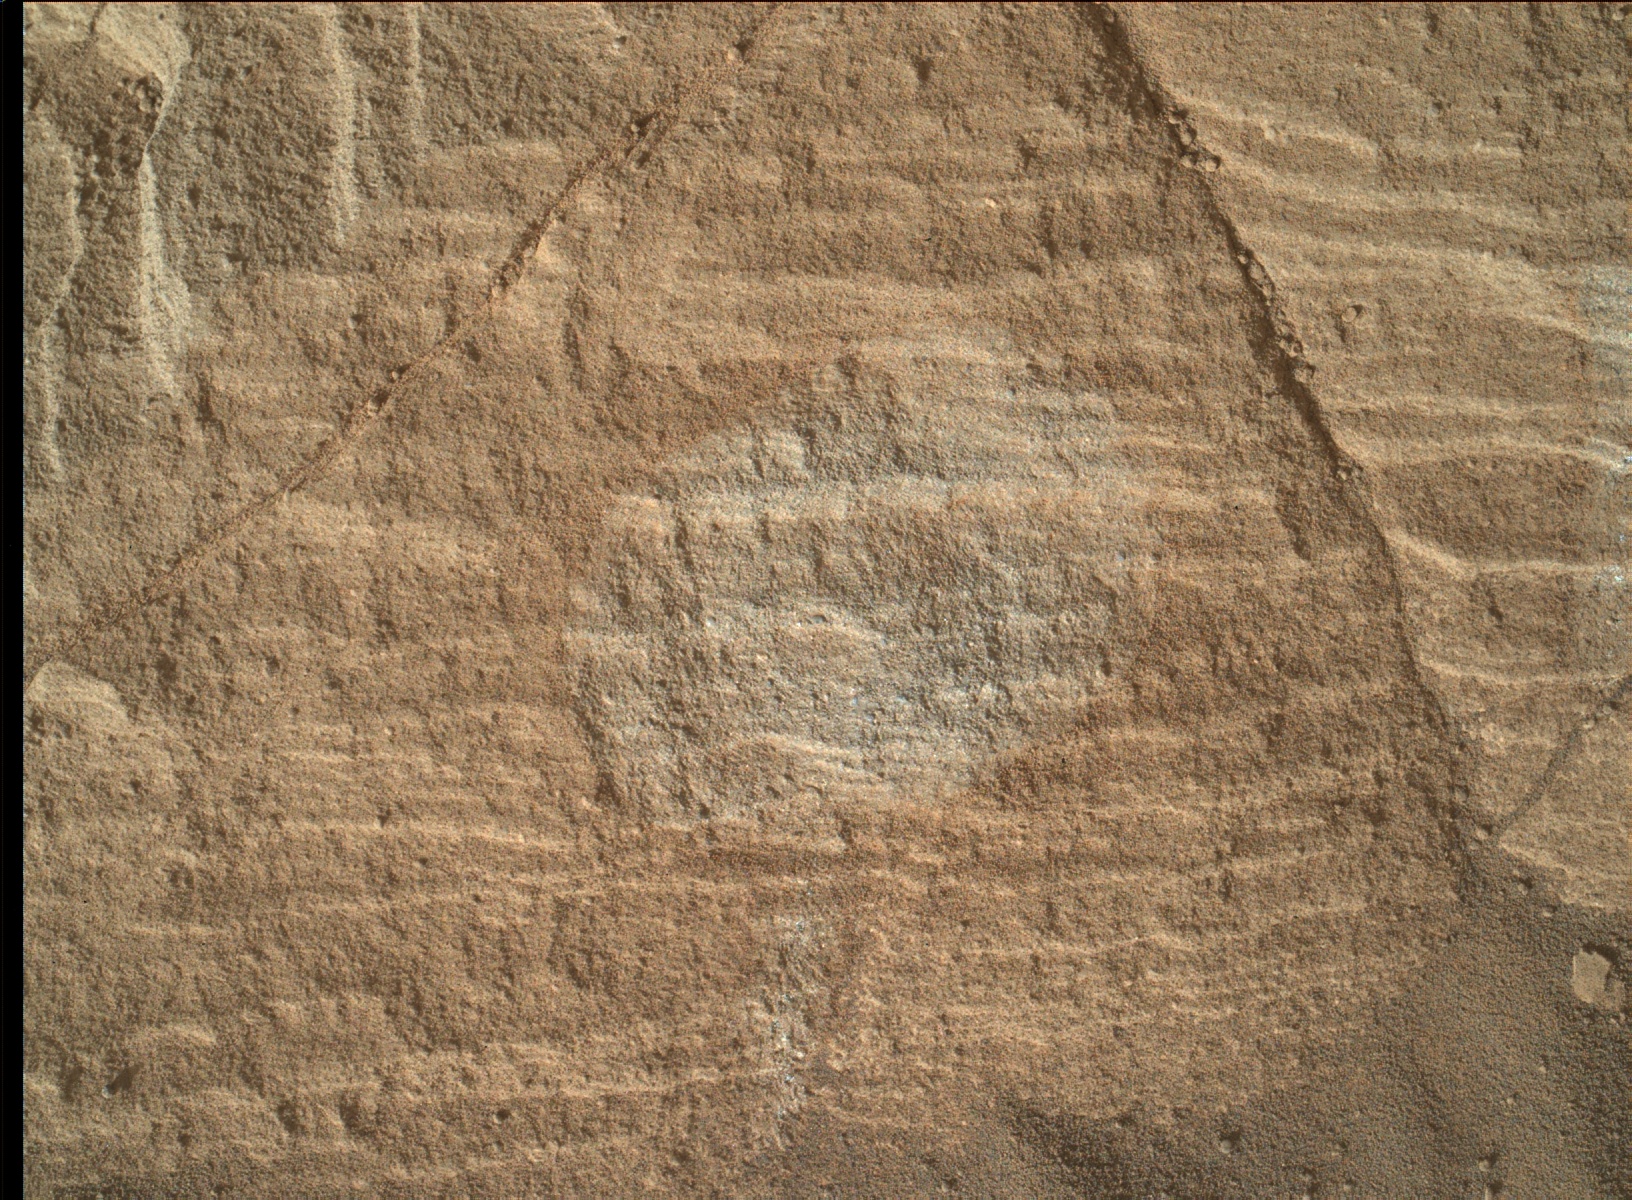 Nasa's Mars rover Curiosity acquired this image using its Mars Hand Lens Imager (MAHLI) on Sol 1130